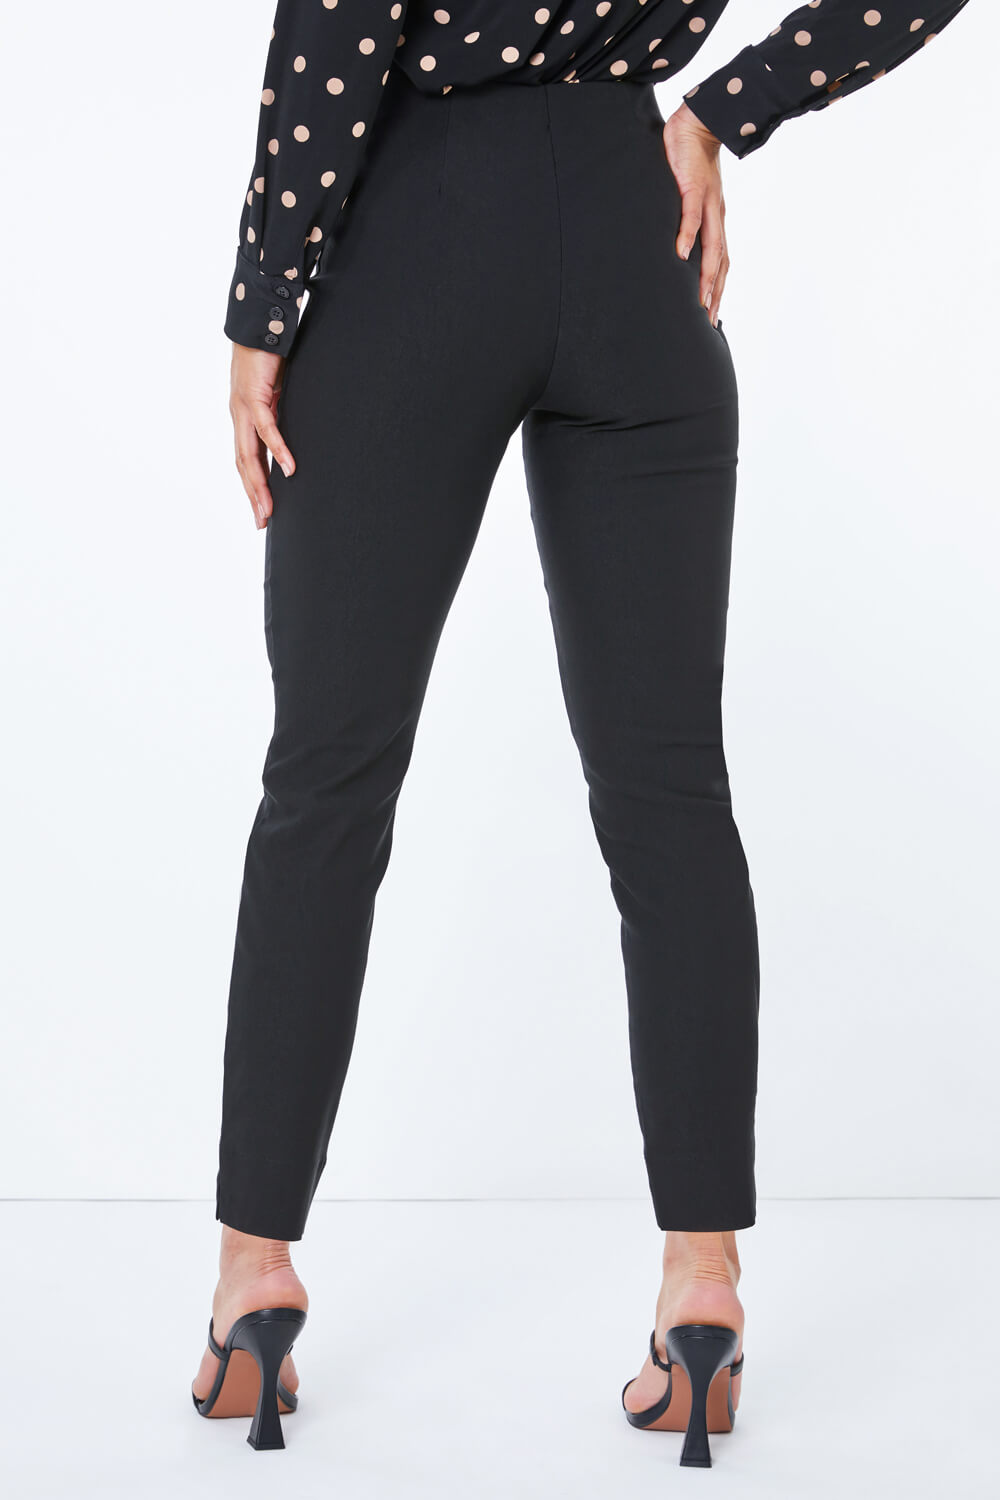 Black Petite Full Length Stretch Trousers , Image 3 of 5